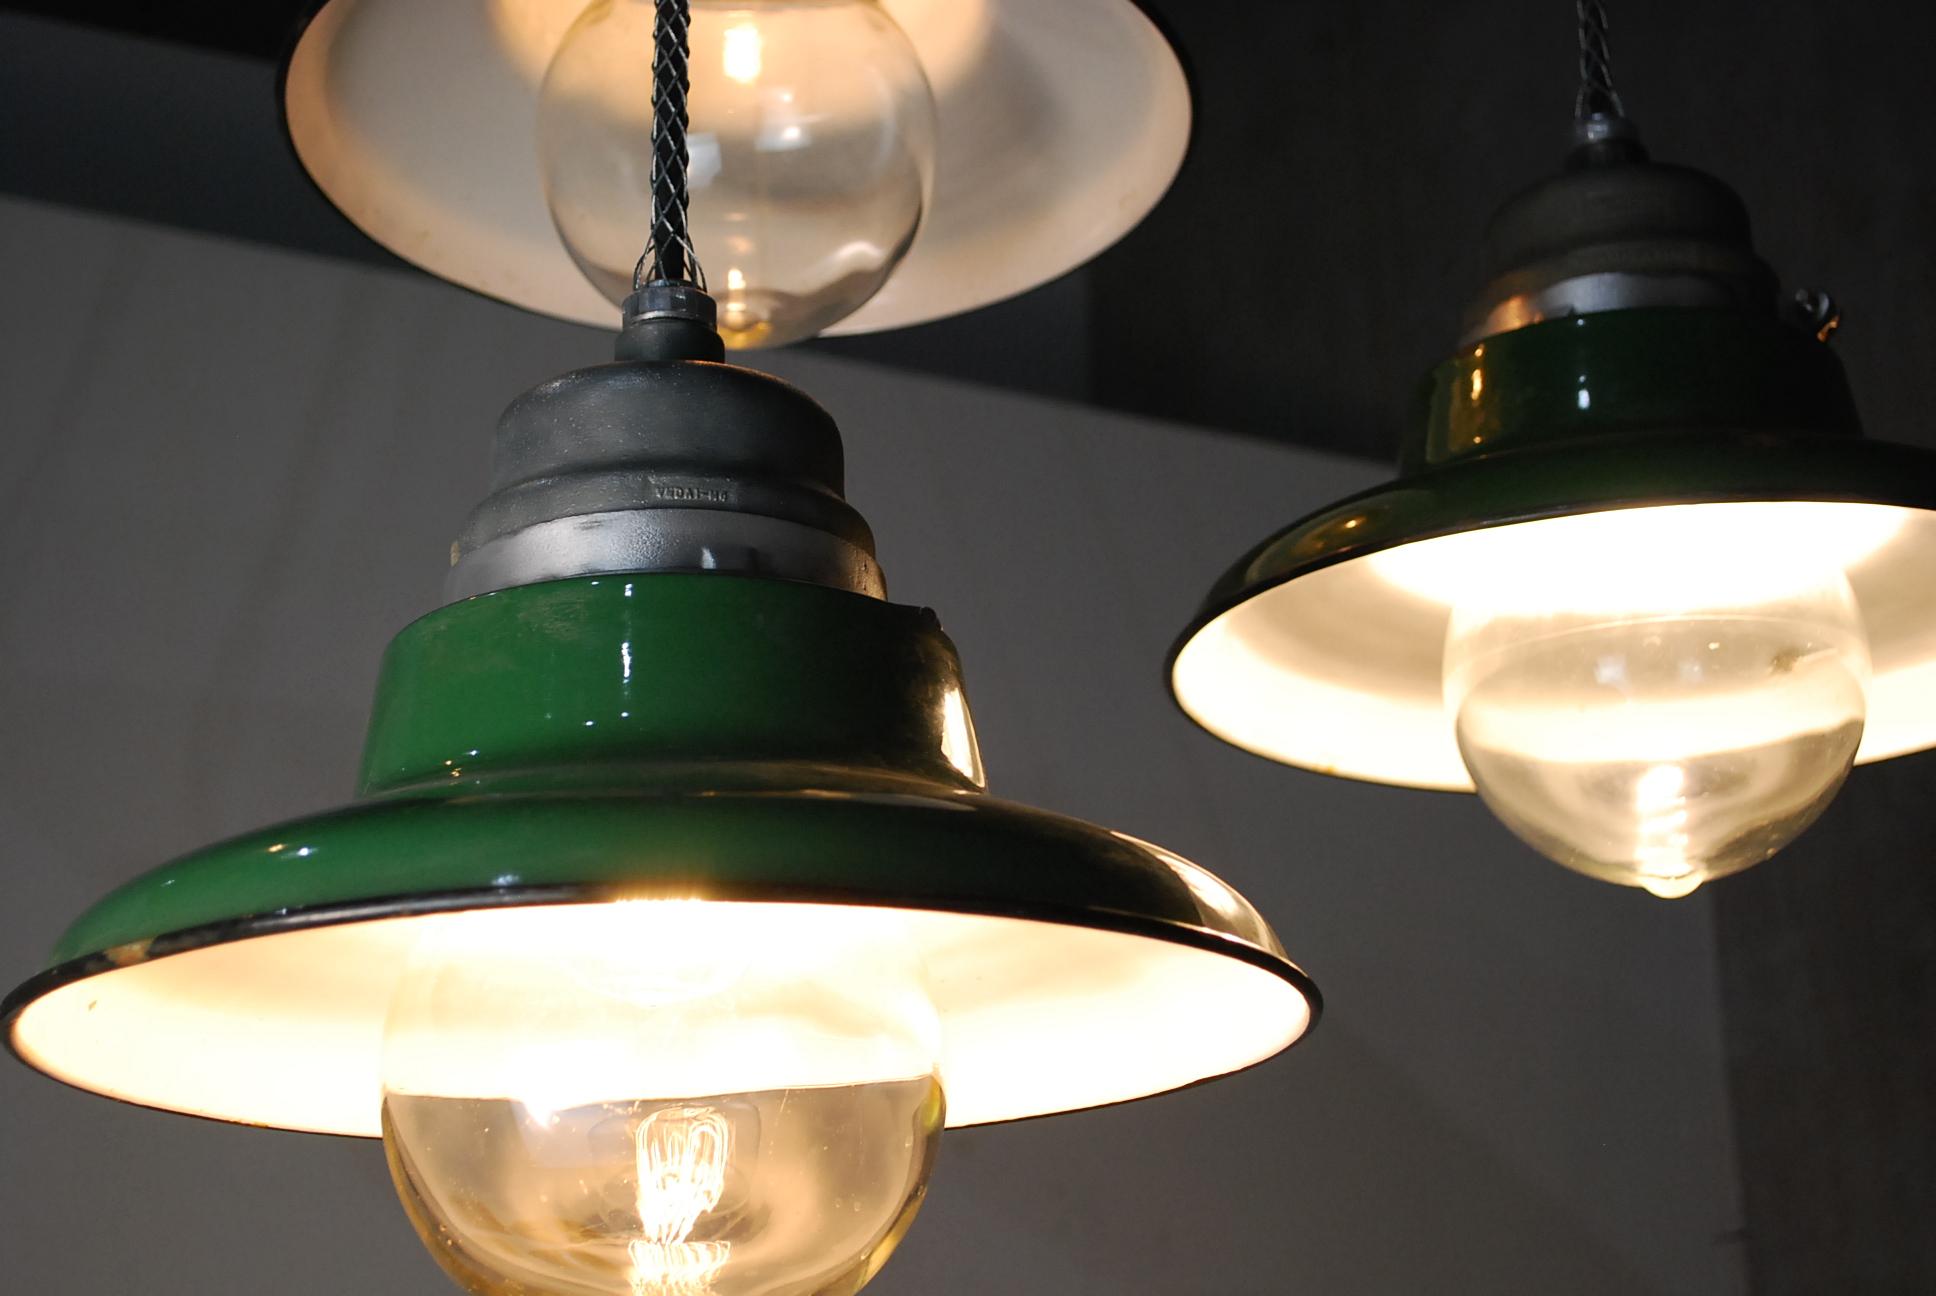 American Set of 20 1930 Industrial Crouse Hinds Pendants Lights